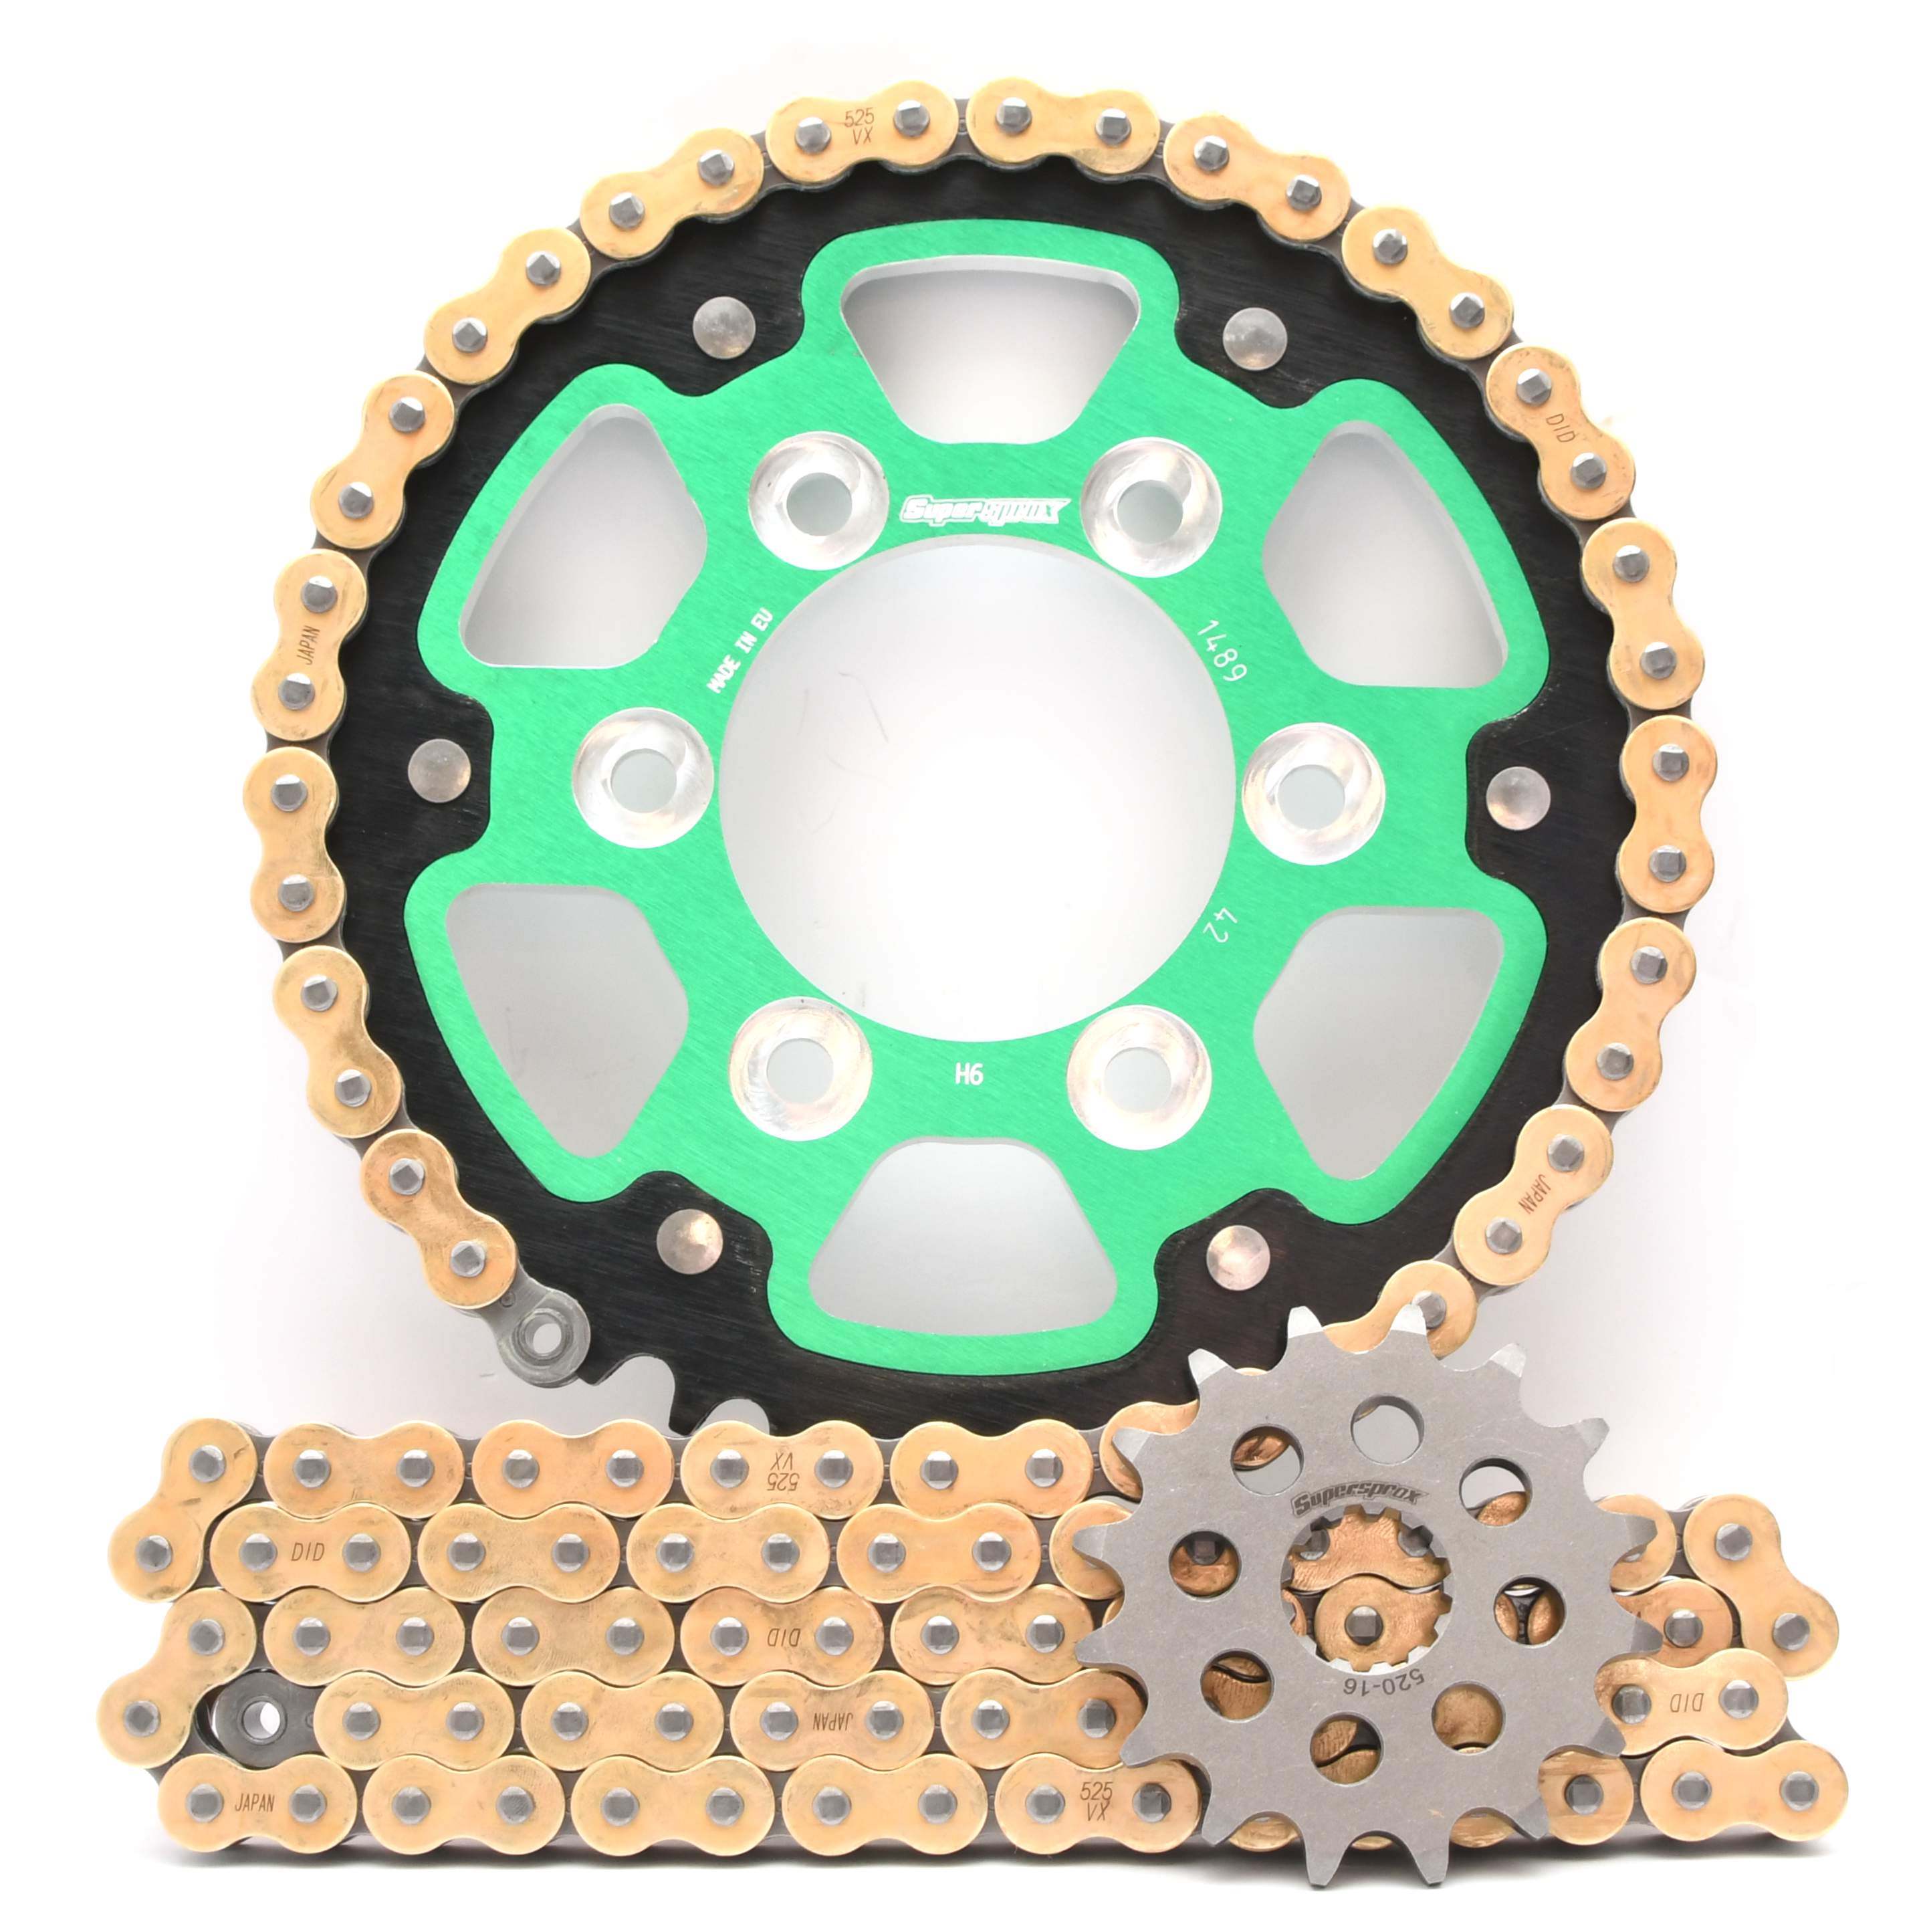 Supersprox Stealth Chain & Sprocket Kit for Kawasaki ZX10R 06-07 - Standard Gearing - 0